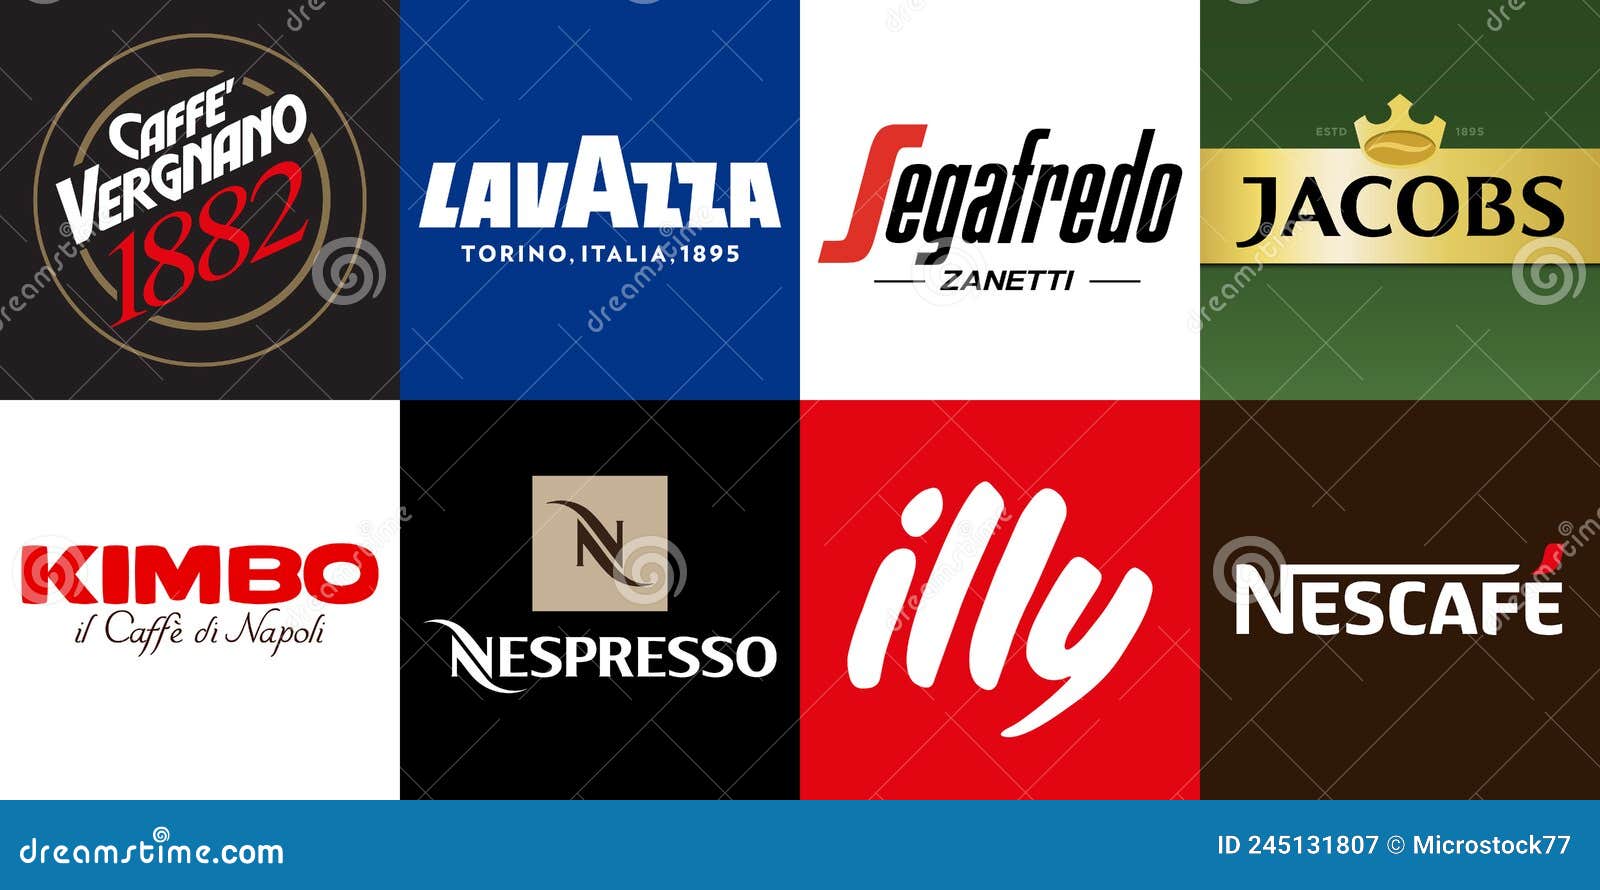 Most Famous Logo Brands Coffee Produce, Lavazza, Illy, Nespresso ...